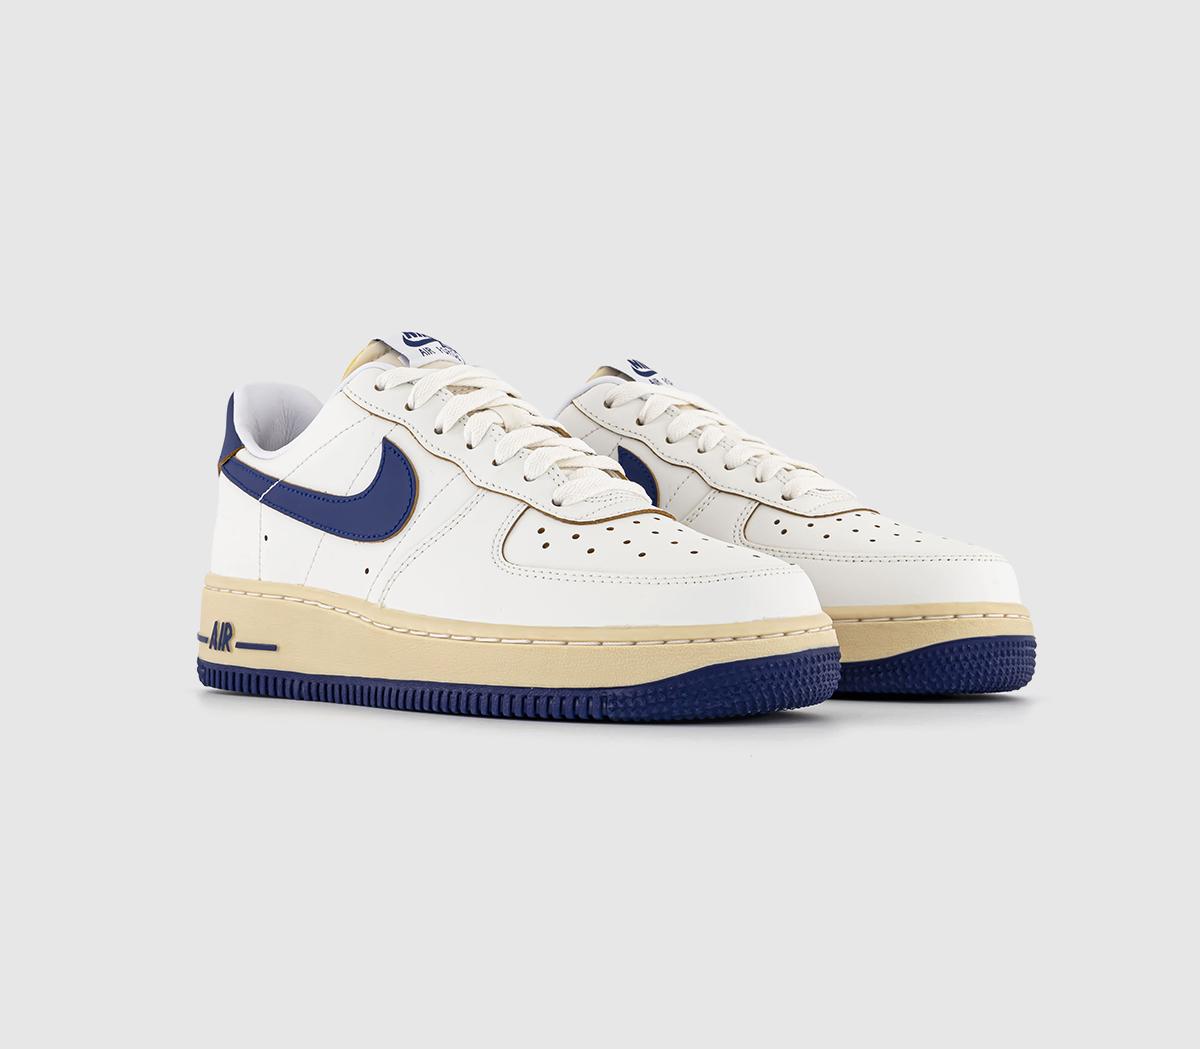 Nike Womens Air Force 1 07 Trainers Sail Deep Royal Blue Pale Vanilla Gold Suede White, 8